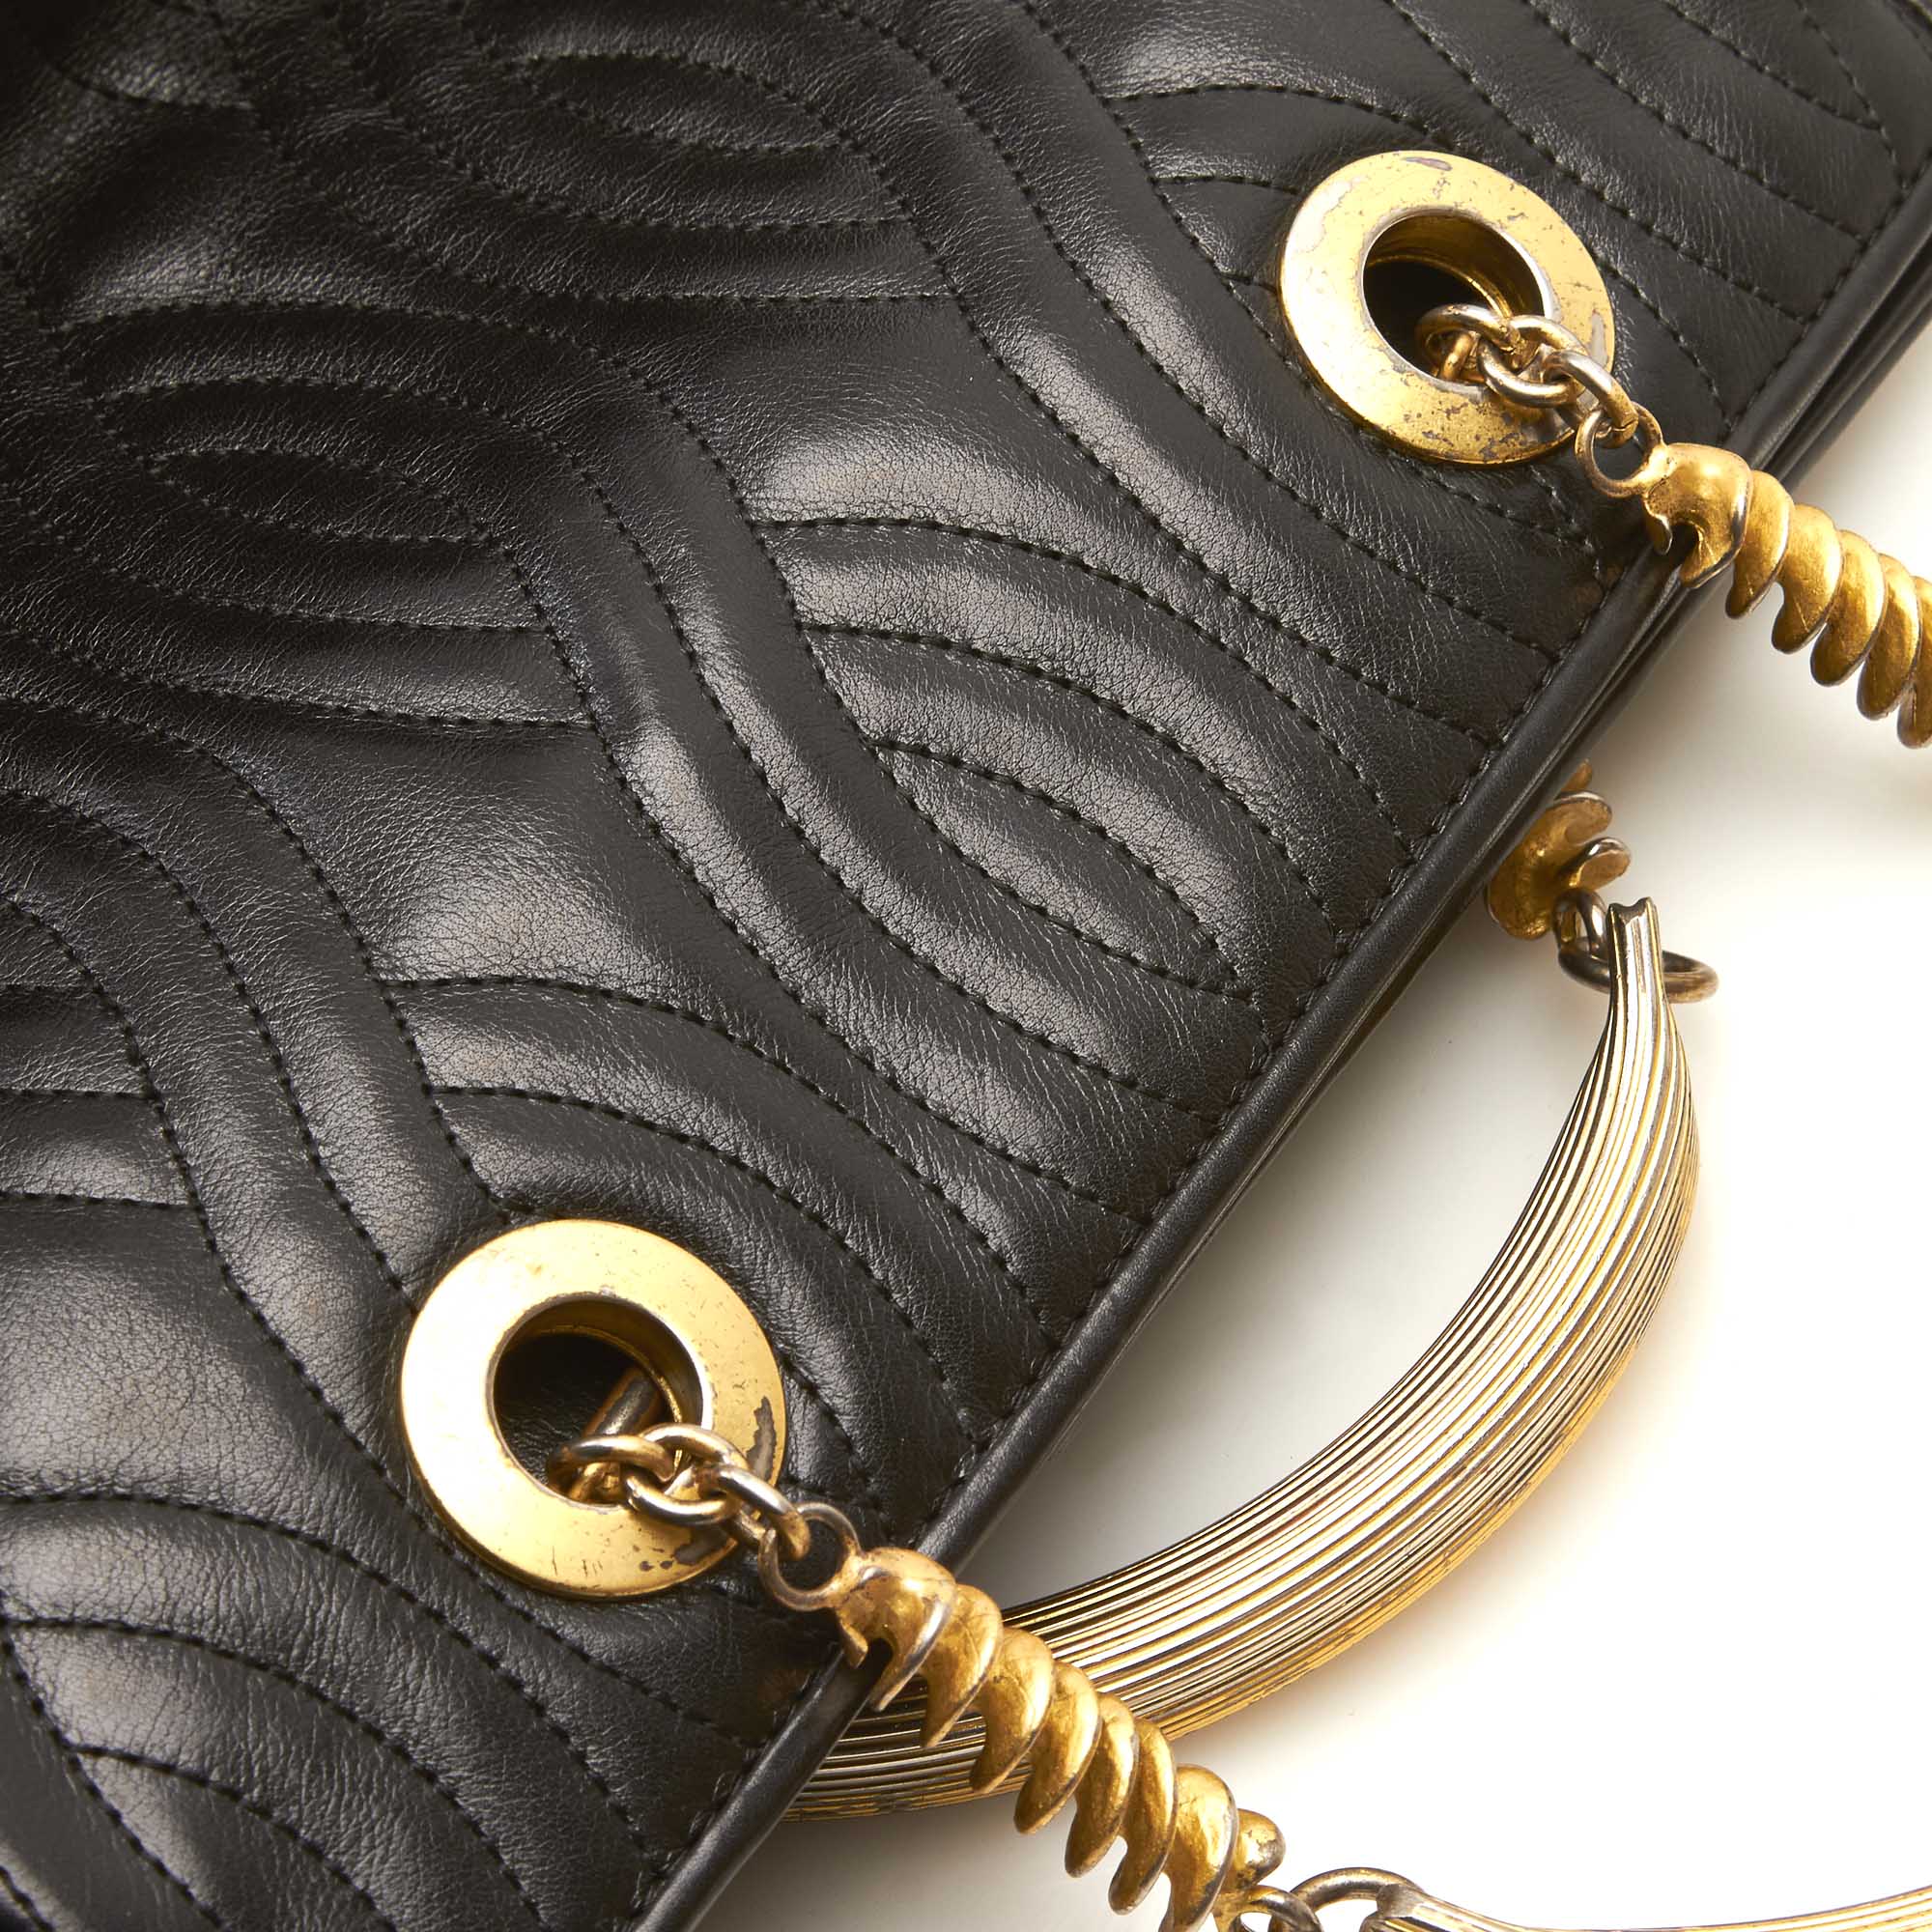 Fendi Quilted Leather Tote Bag, this tote bag features a quilted leather body, metal handles, a - Image 11 of 11